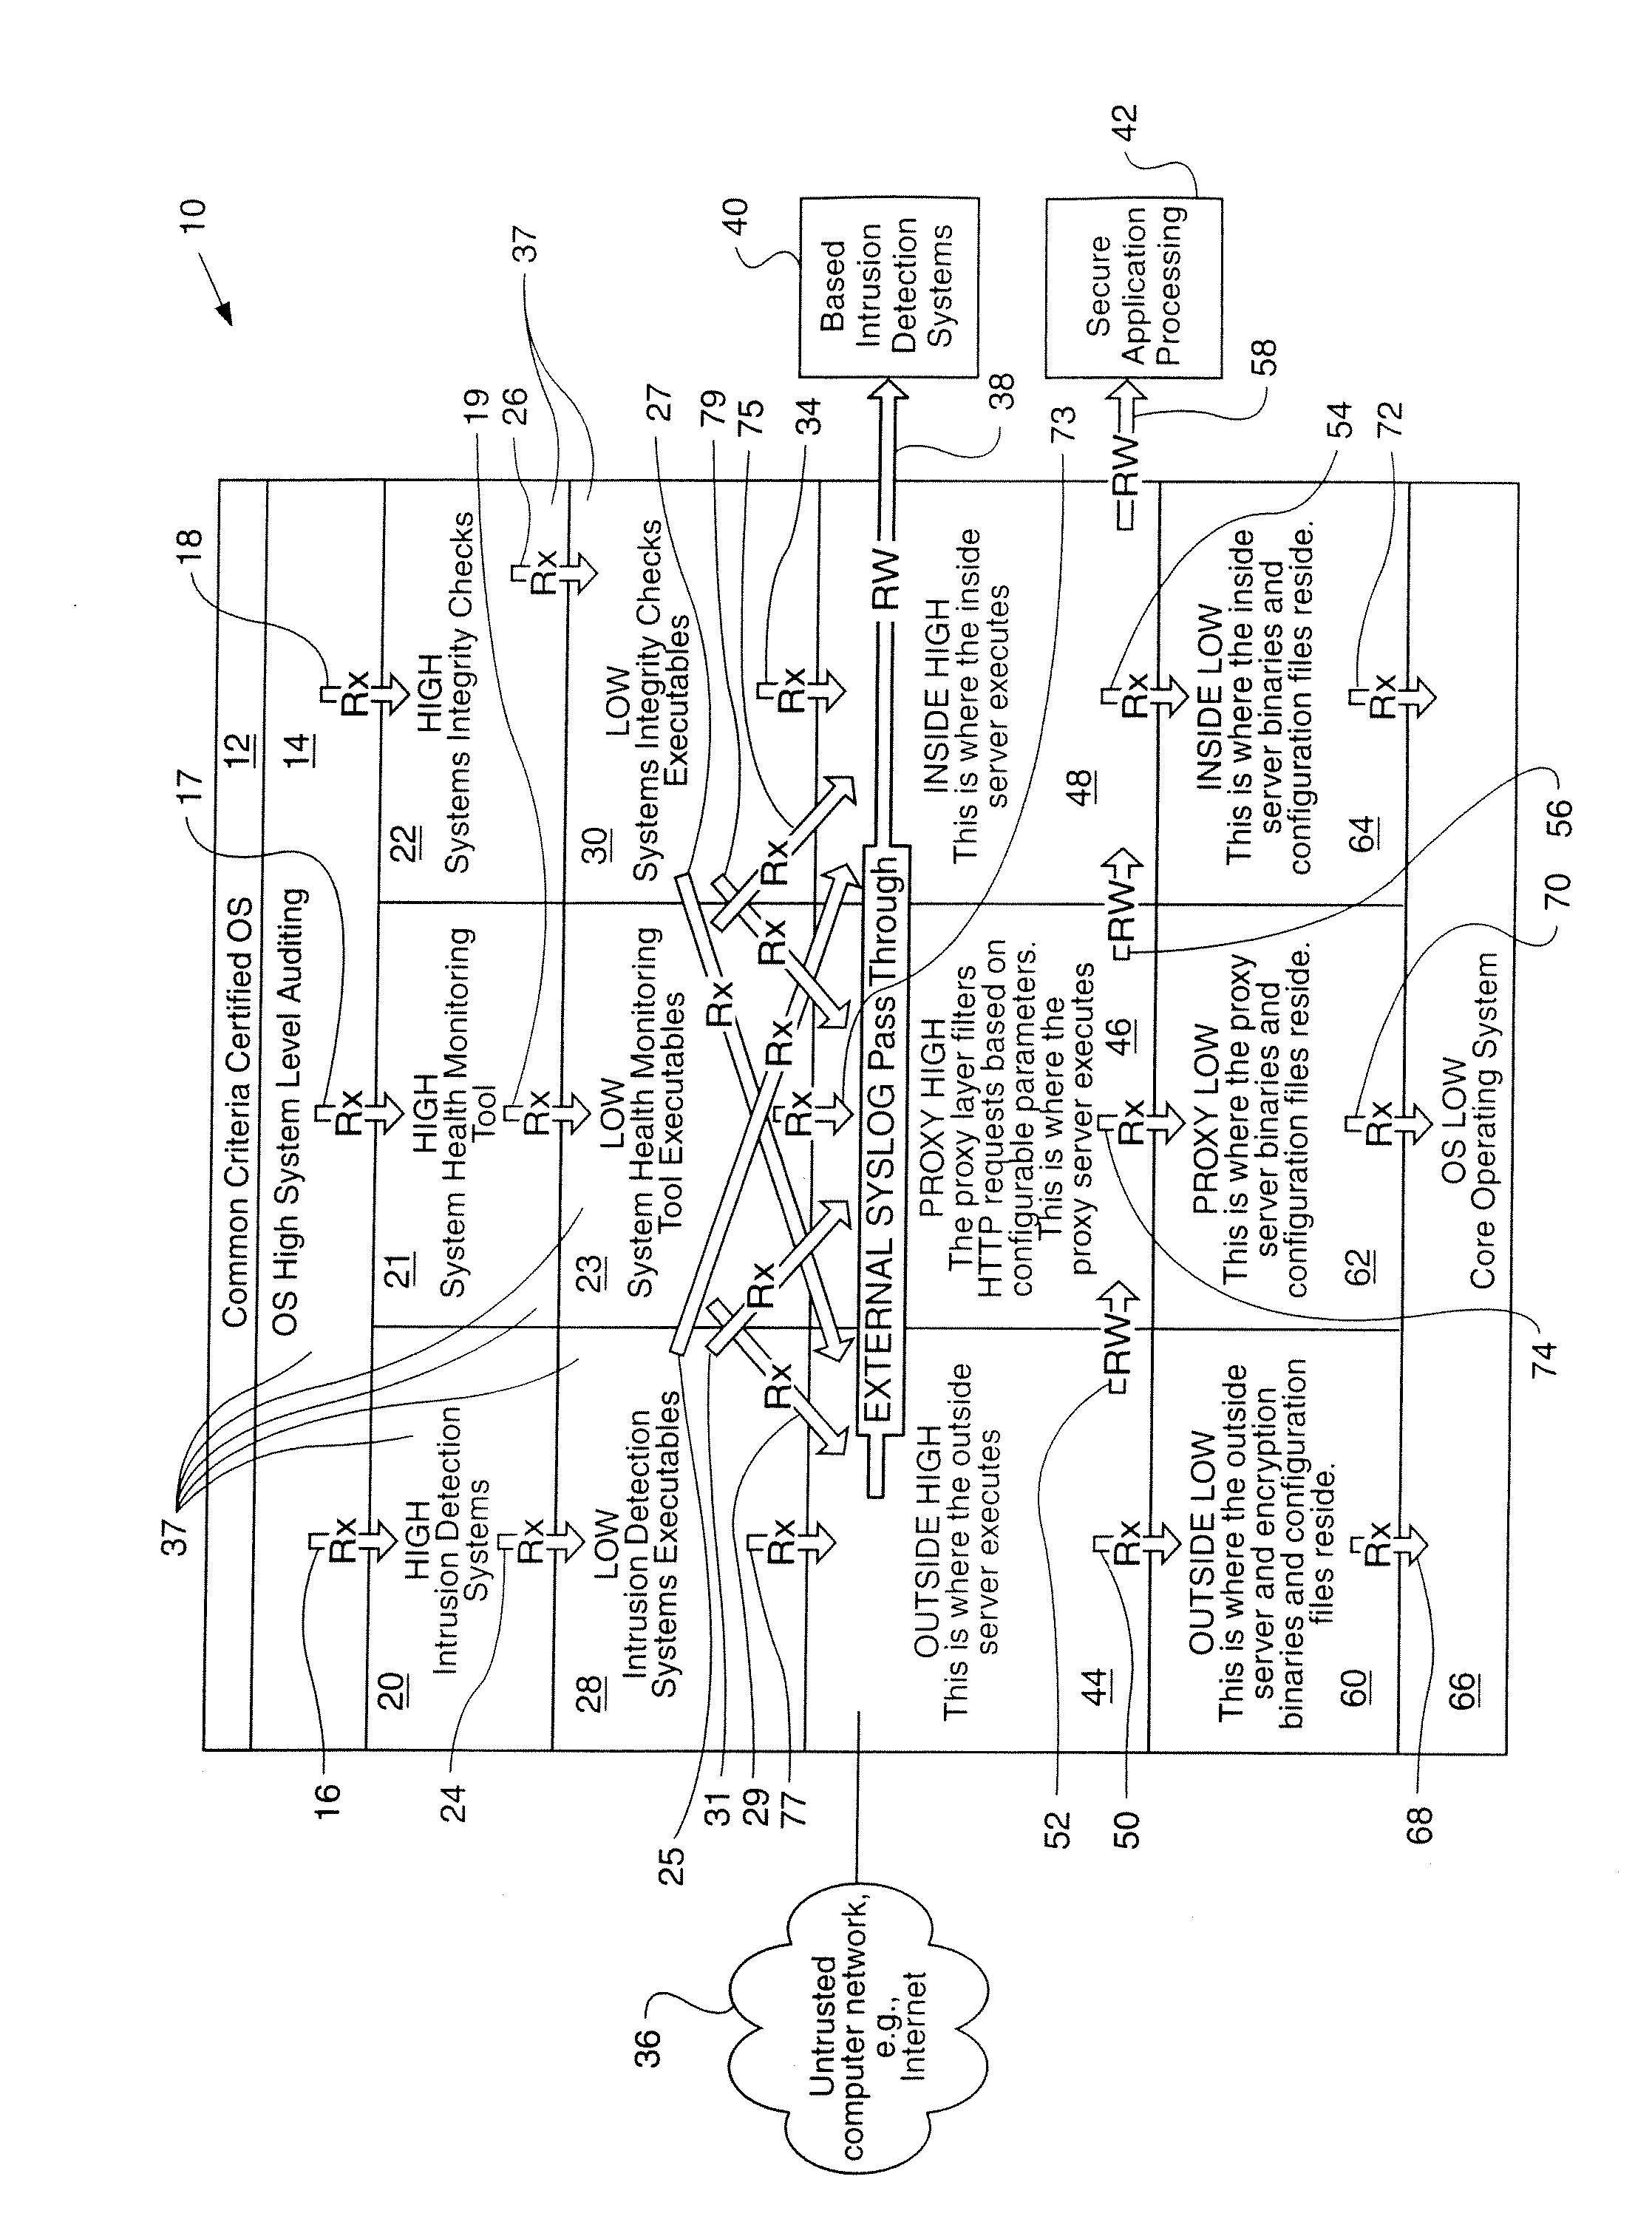 Secure network system and associated method of use